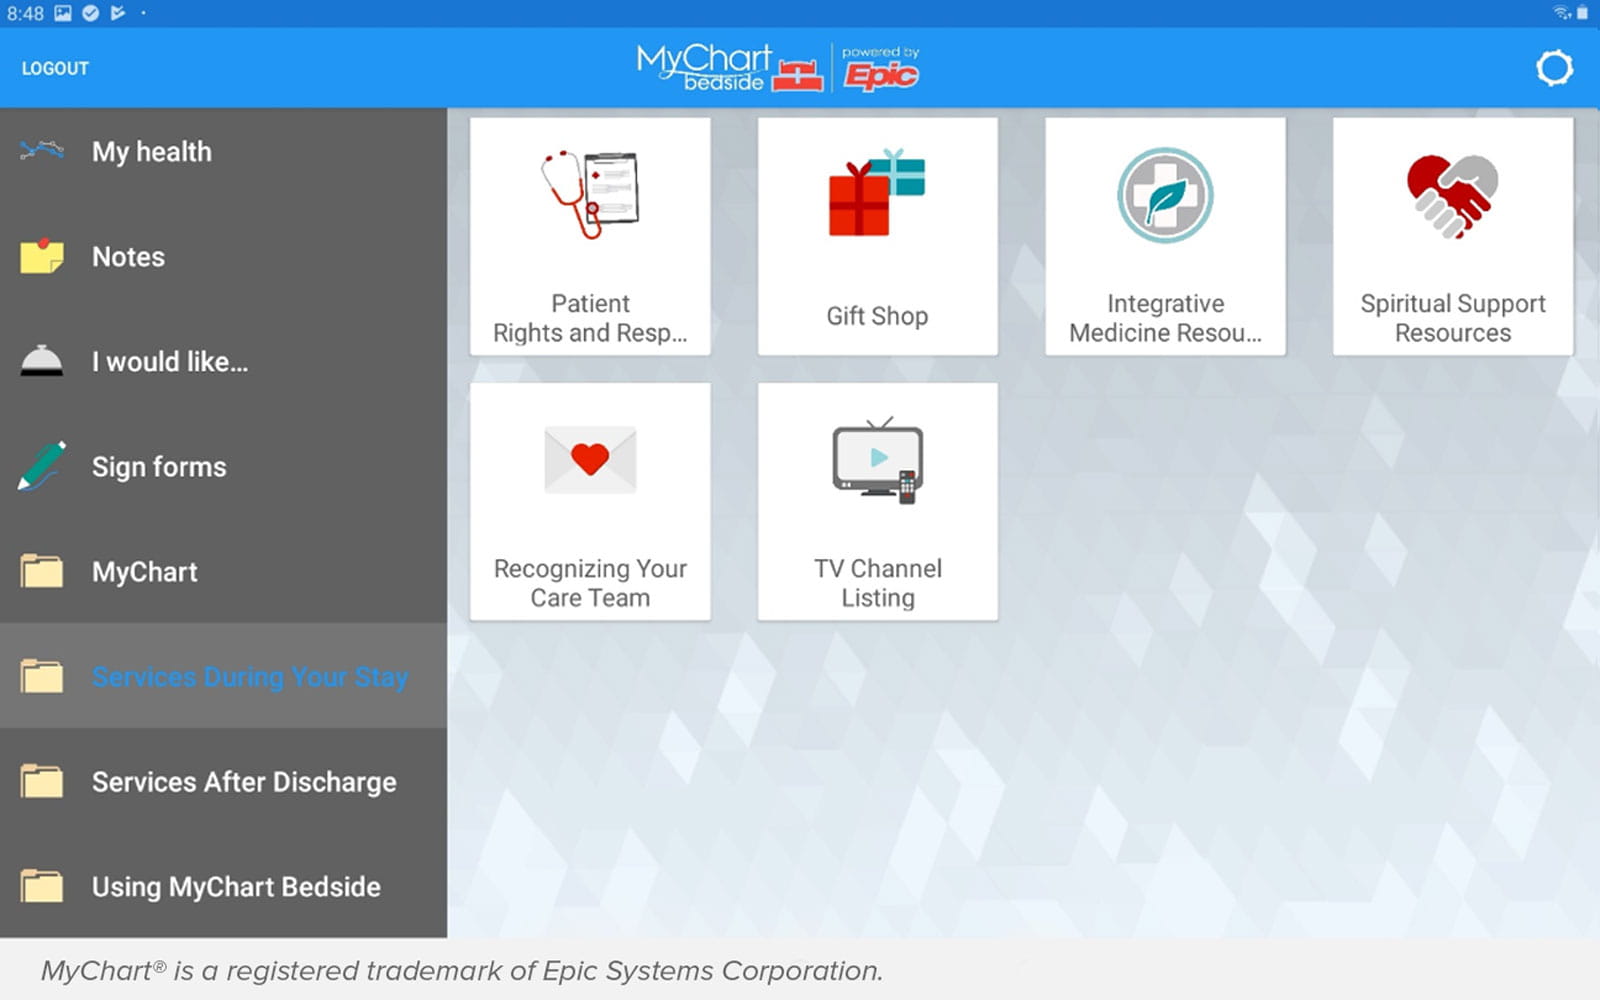 The services screen in MyChart Bedside